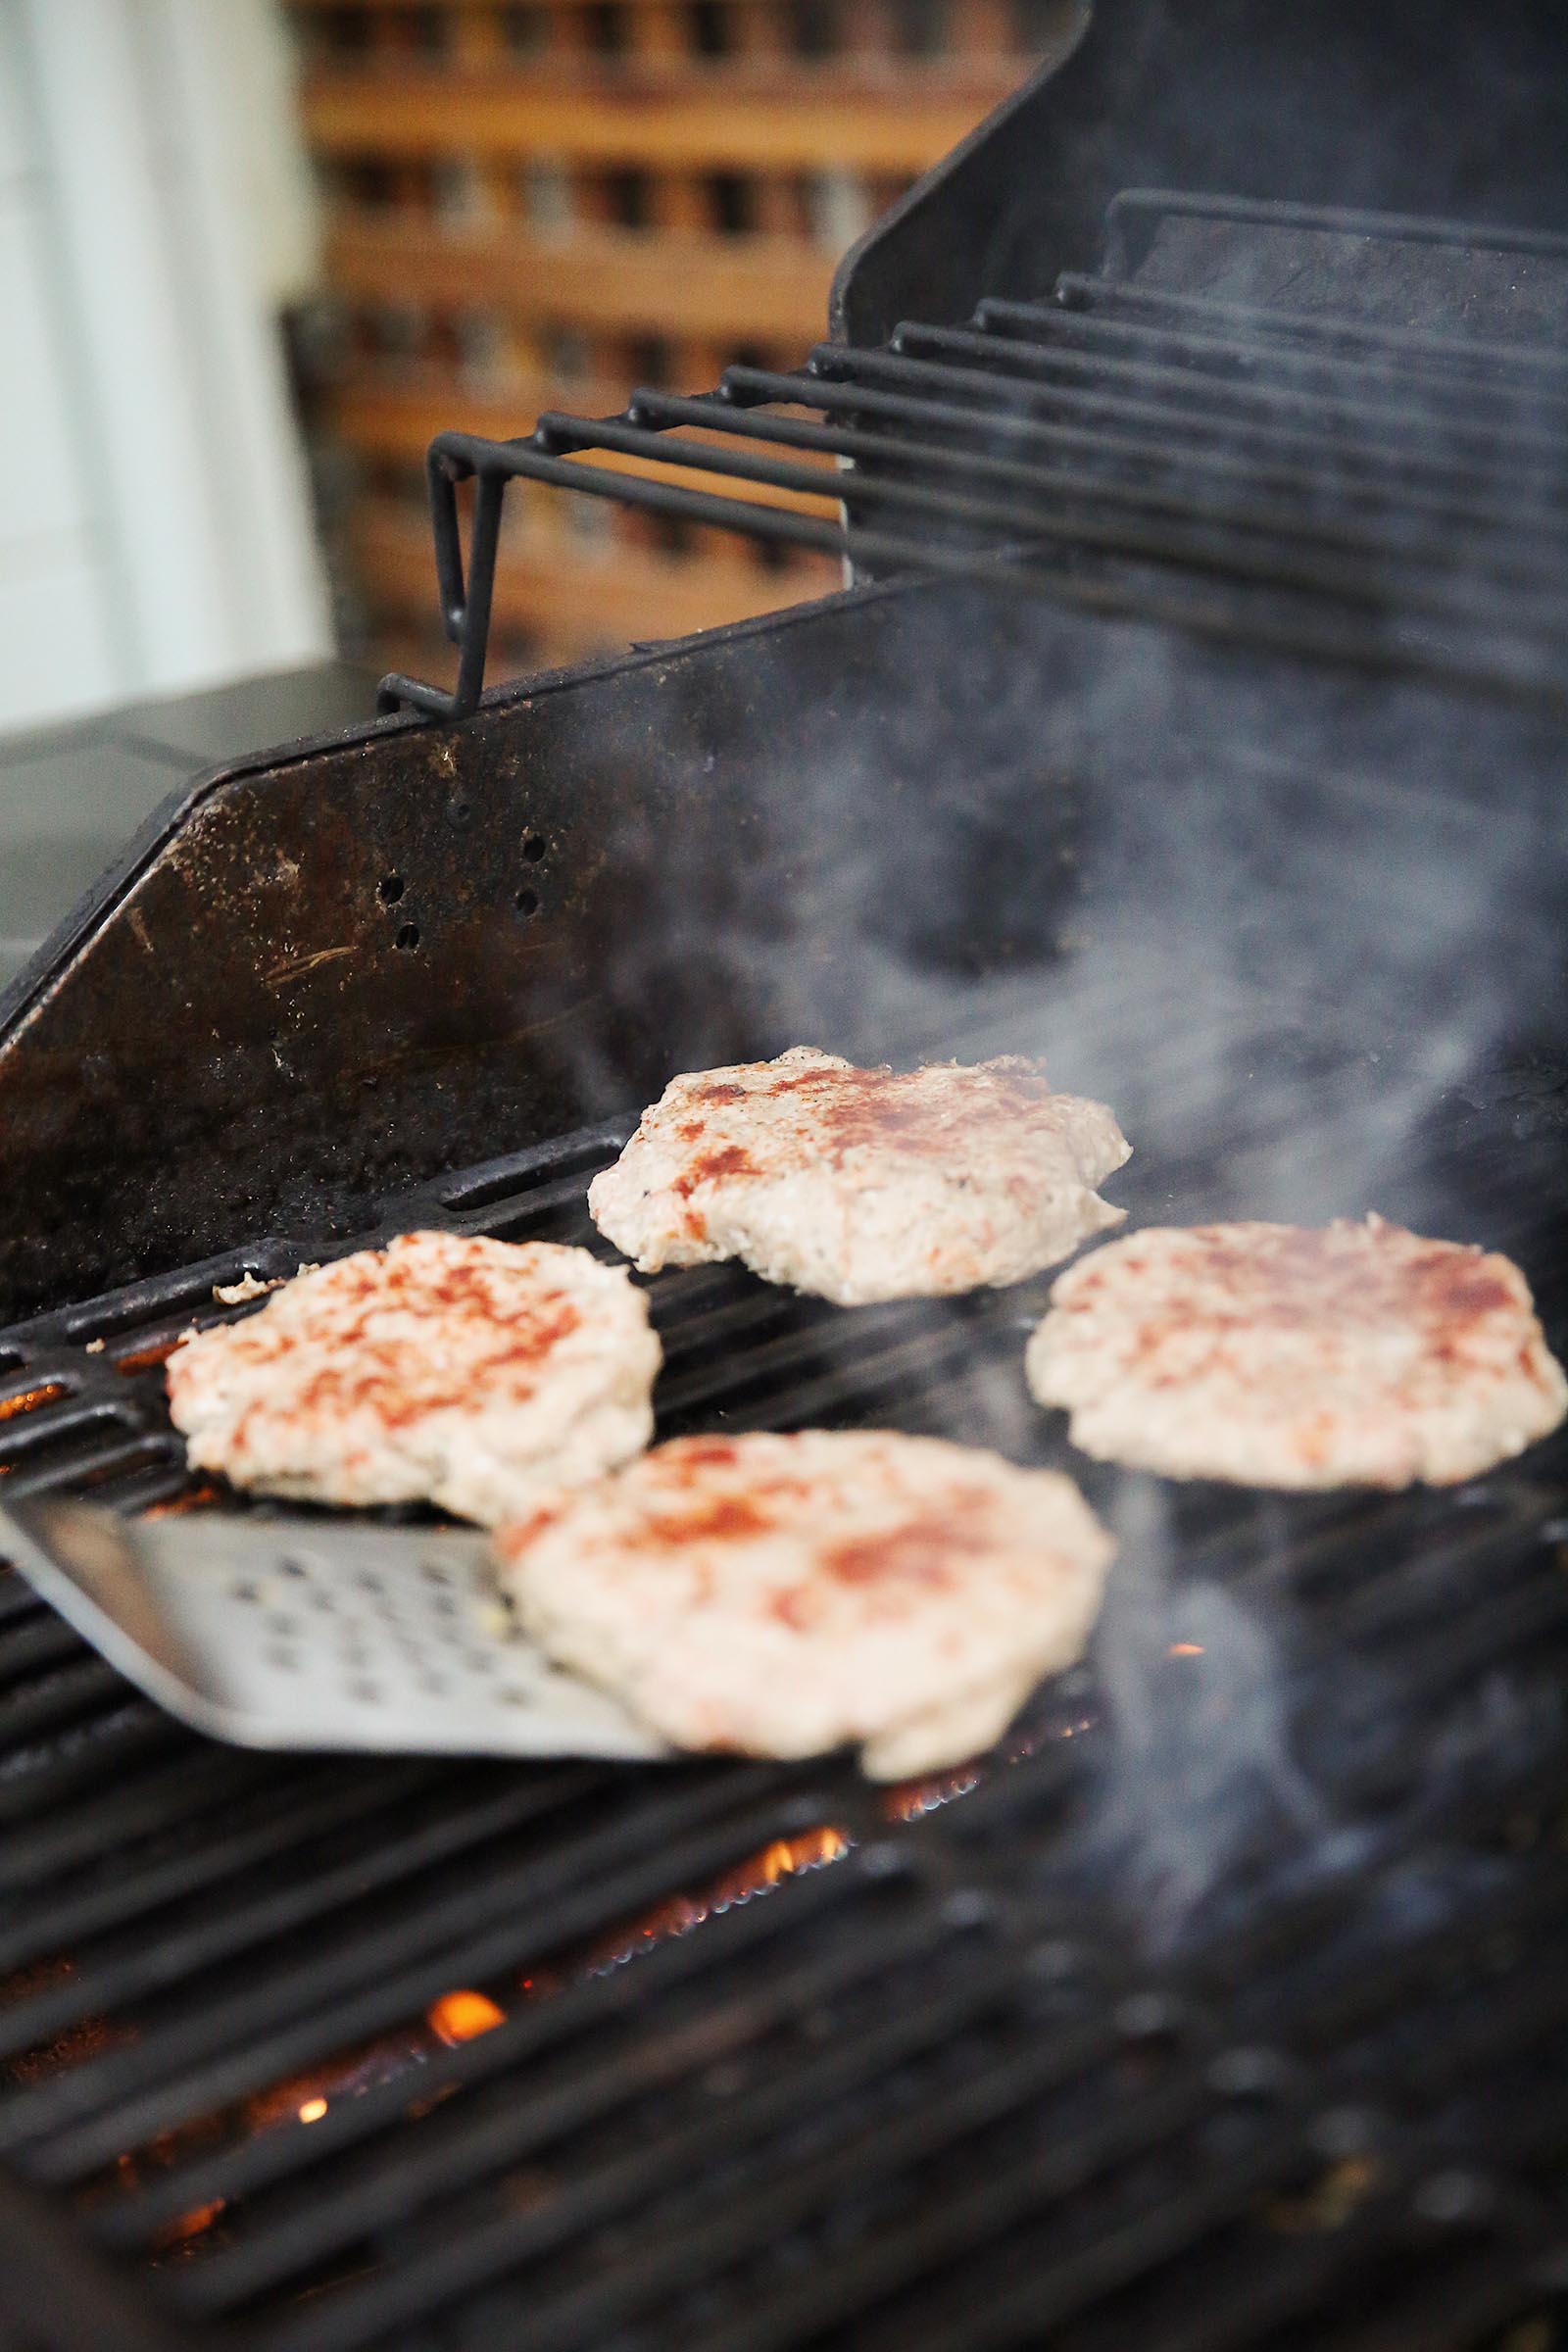 turkey smash burgers recipe featured by popular San Francisco lifestyle blogger, Just Add Glam